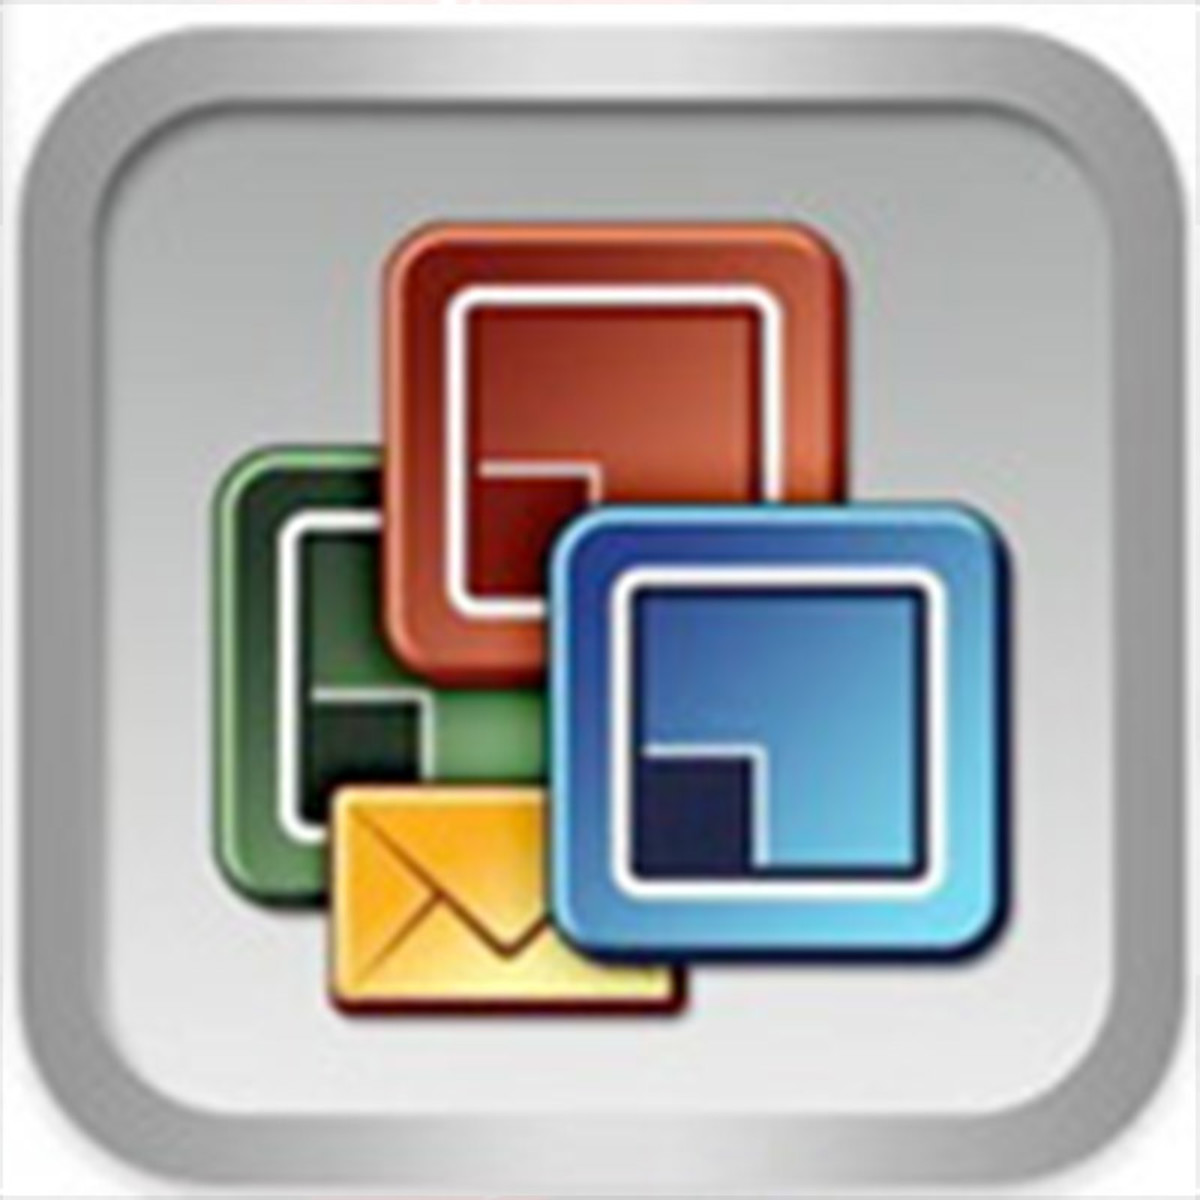 DocstoGo (iPhone/BlackBerry/Android-Documents to Go  is a clooud file suppor App that allows you to view, import, and export Microsoft. Apple iWorks, PDF and other files. Decuments to Go also supports other online cloud services: Google Docs, Box.net